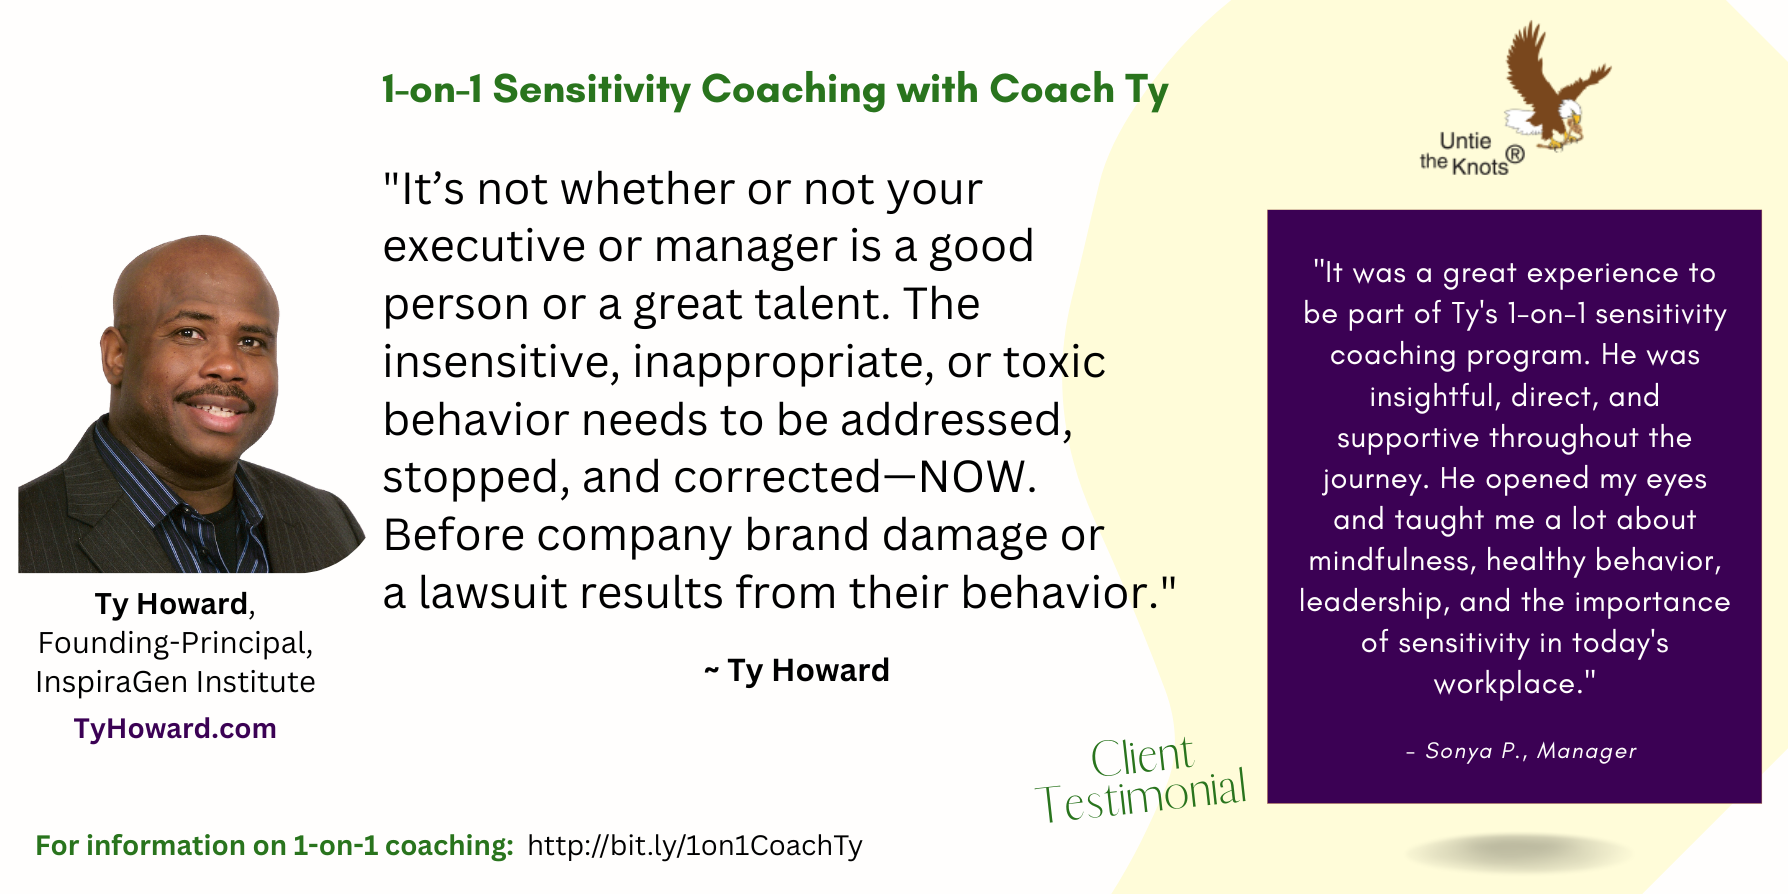 Ty Howard's 1-on-1 Sensitivity Coaching Services Sensitivity Coach for Executive Managers Coach Ty Howard Baltimore Maryland DC Virginia